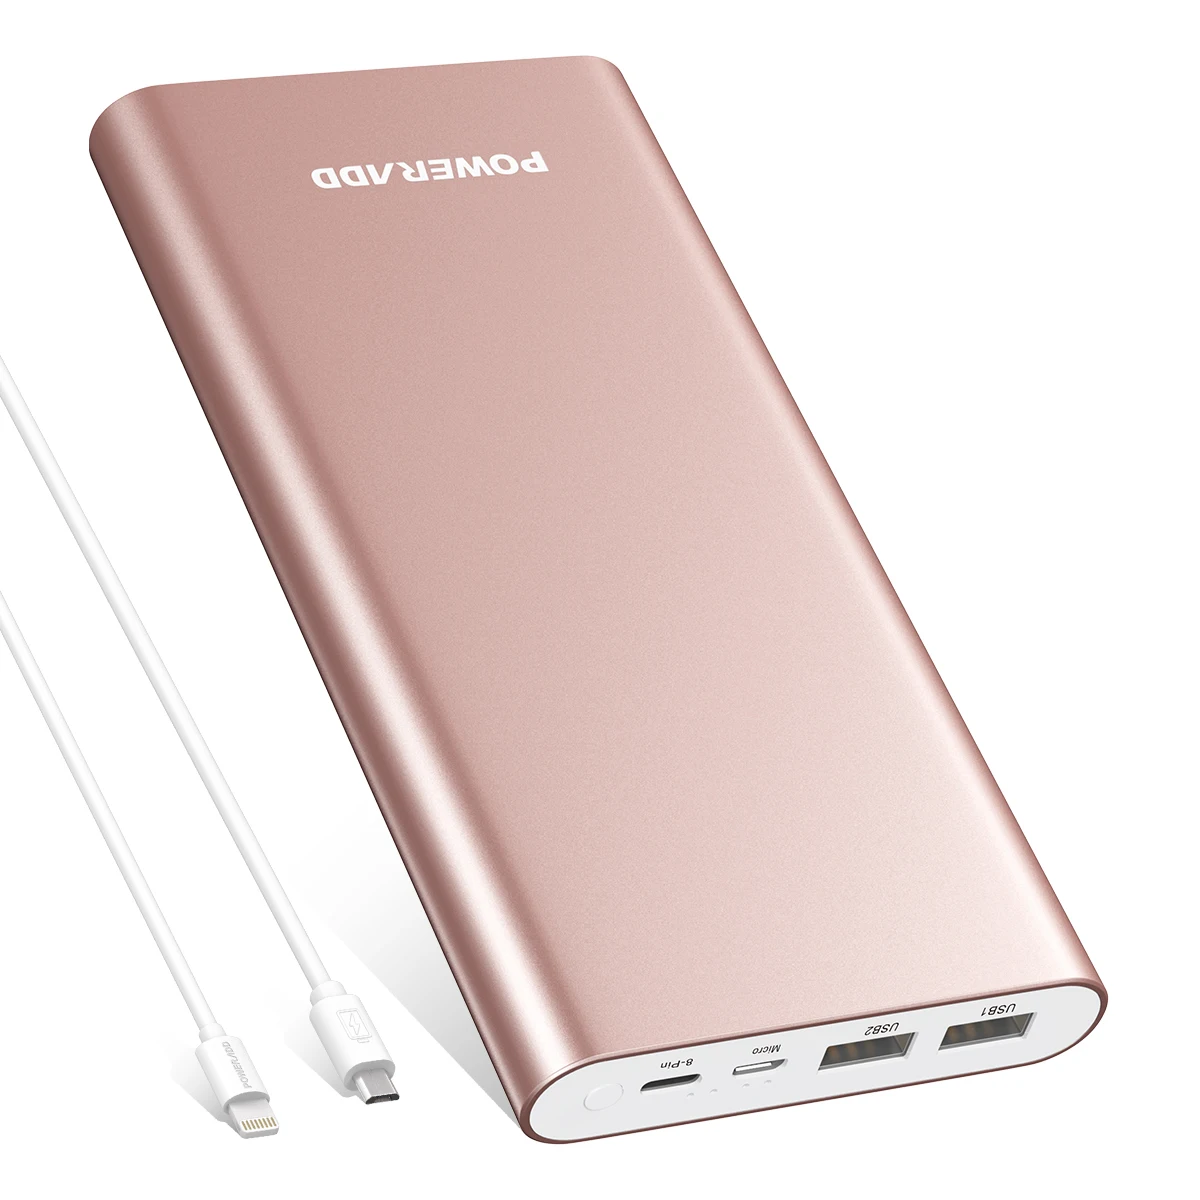 

Different Colour Dual Usb Well Designed Portable Slim External Battery Power Bank For Smartphone 12000mAh